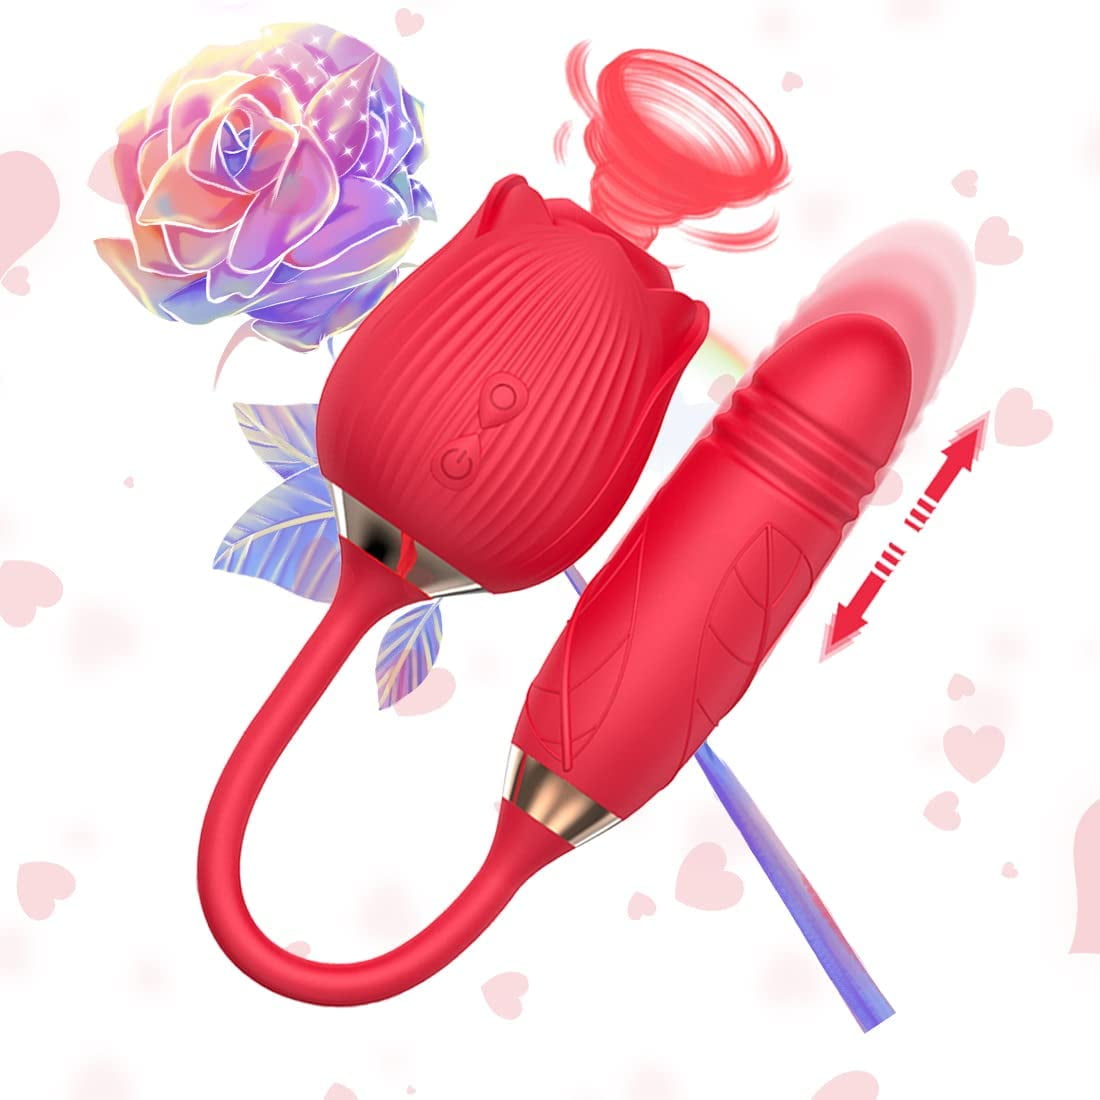 Washable Waterproof Rechargeable Rose Flower Toy for Women caixin663 2021 Upgraded Women Rose Toys with 10 Gears 